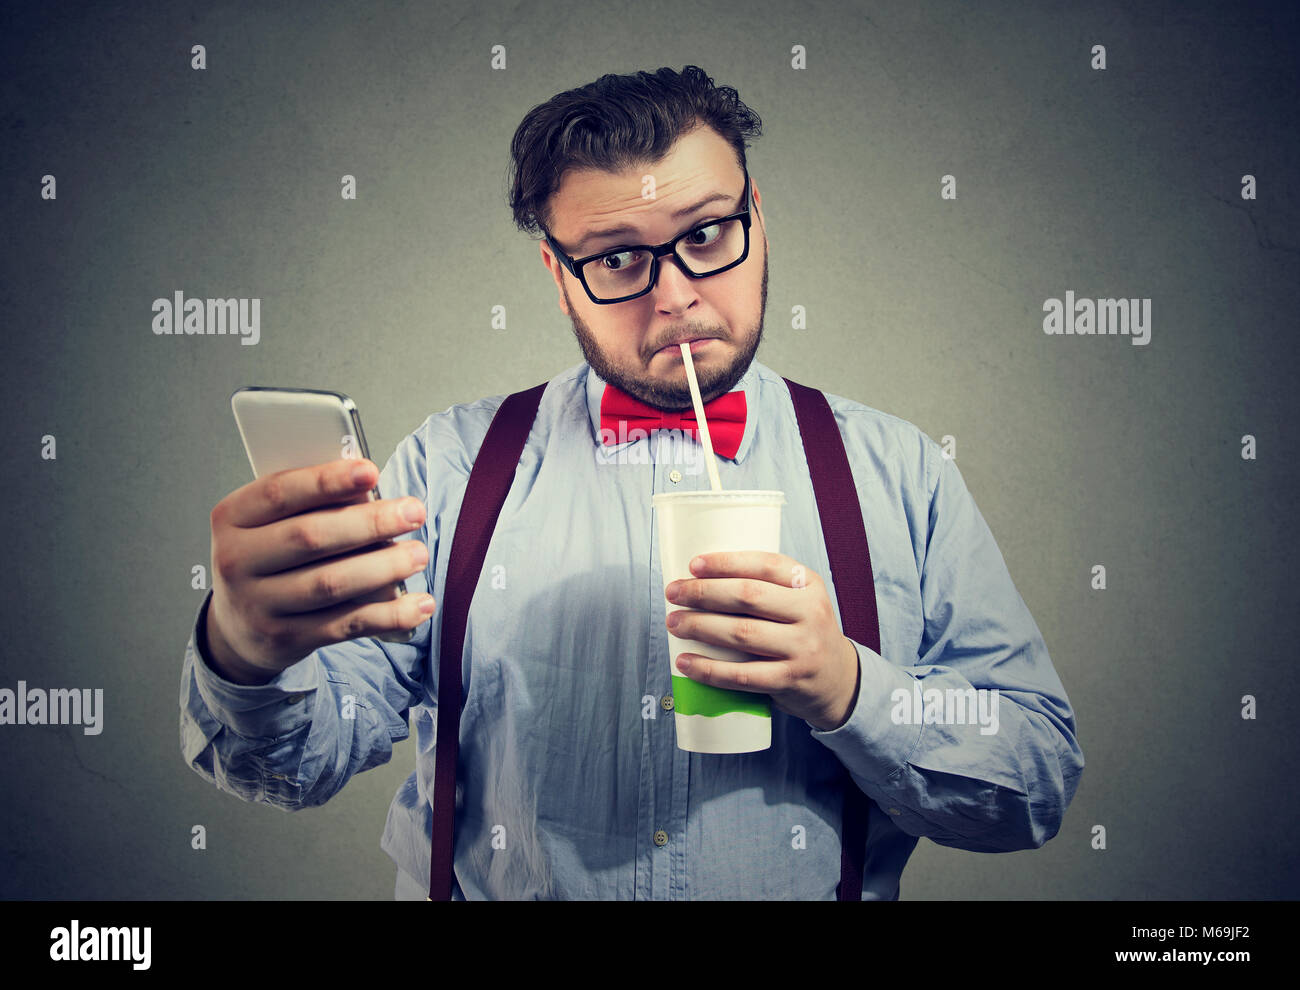 Young chubby man addicted to social media and network using phone and drinking sweet soda. Stock Photo